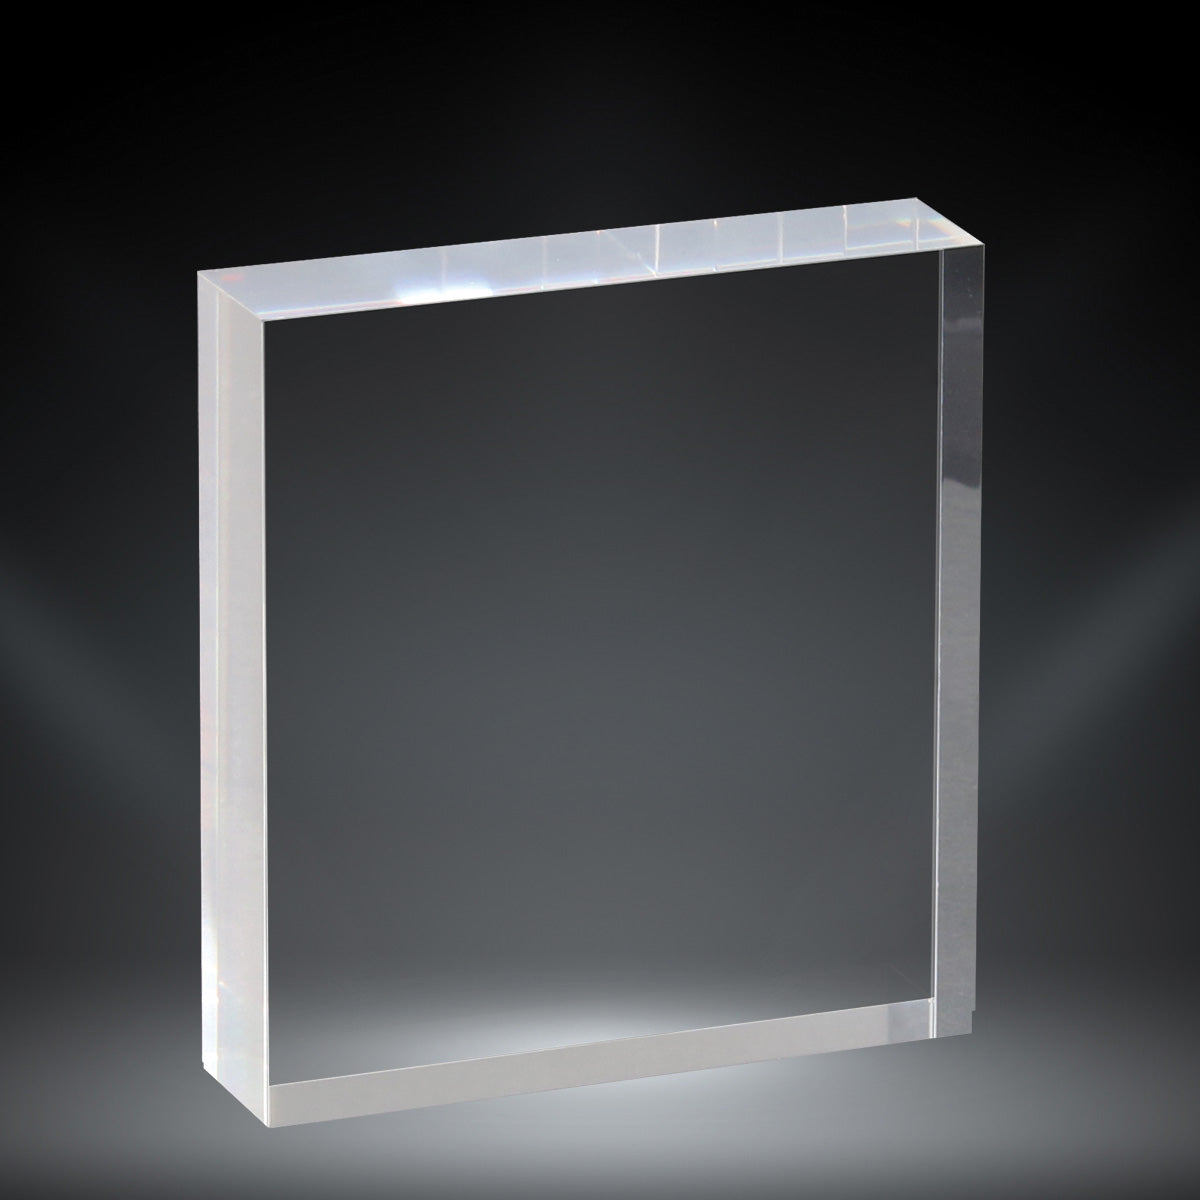 6 x 8 CLEAR MACHINE GROOVED ACRYLIC AWARD RECTANGLE ON MARBLE BASE